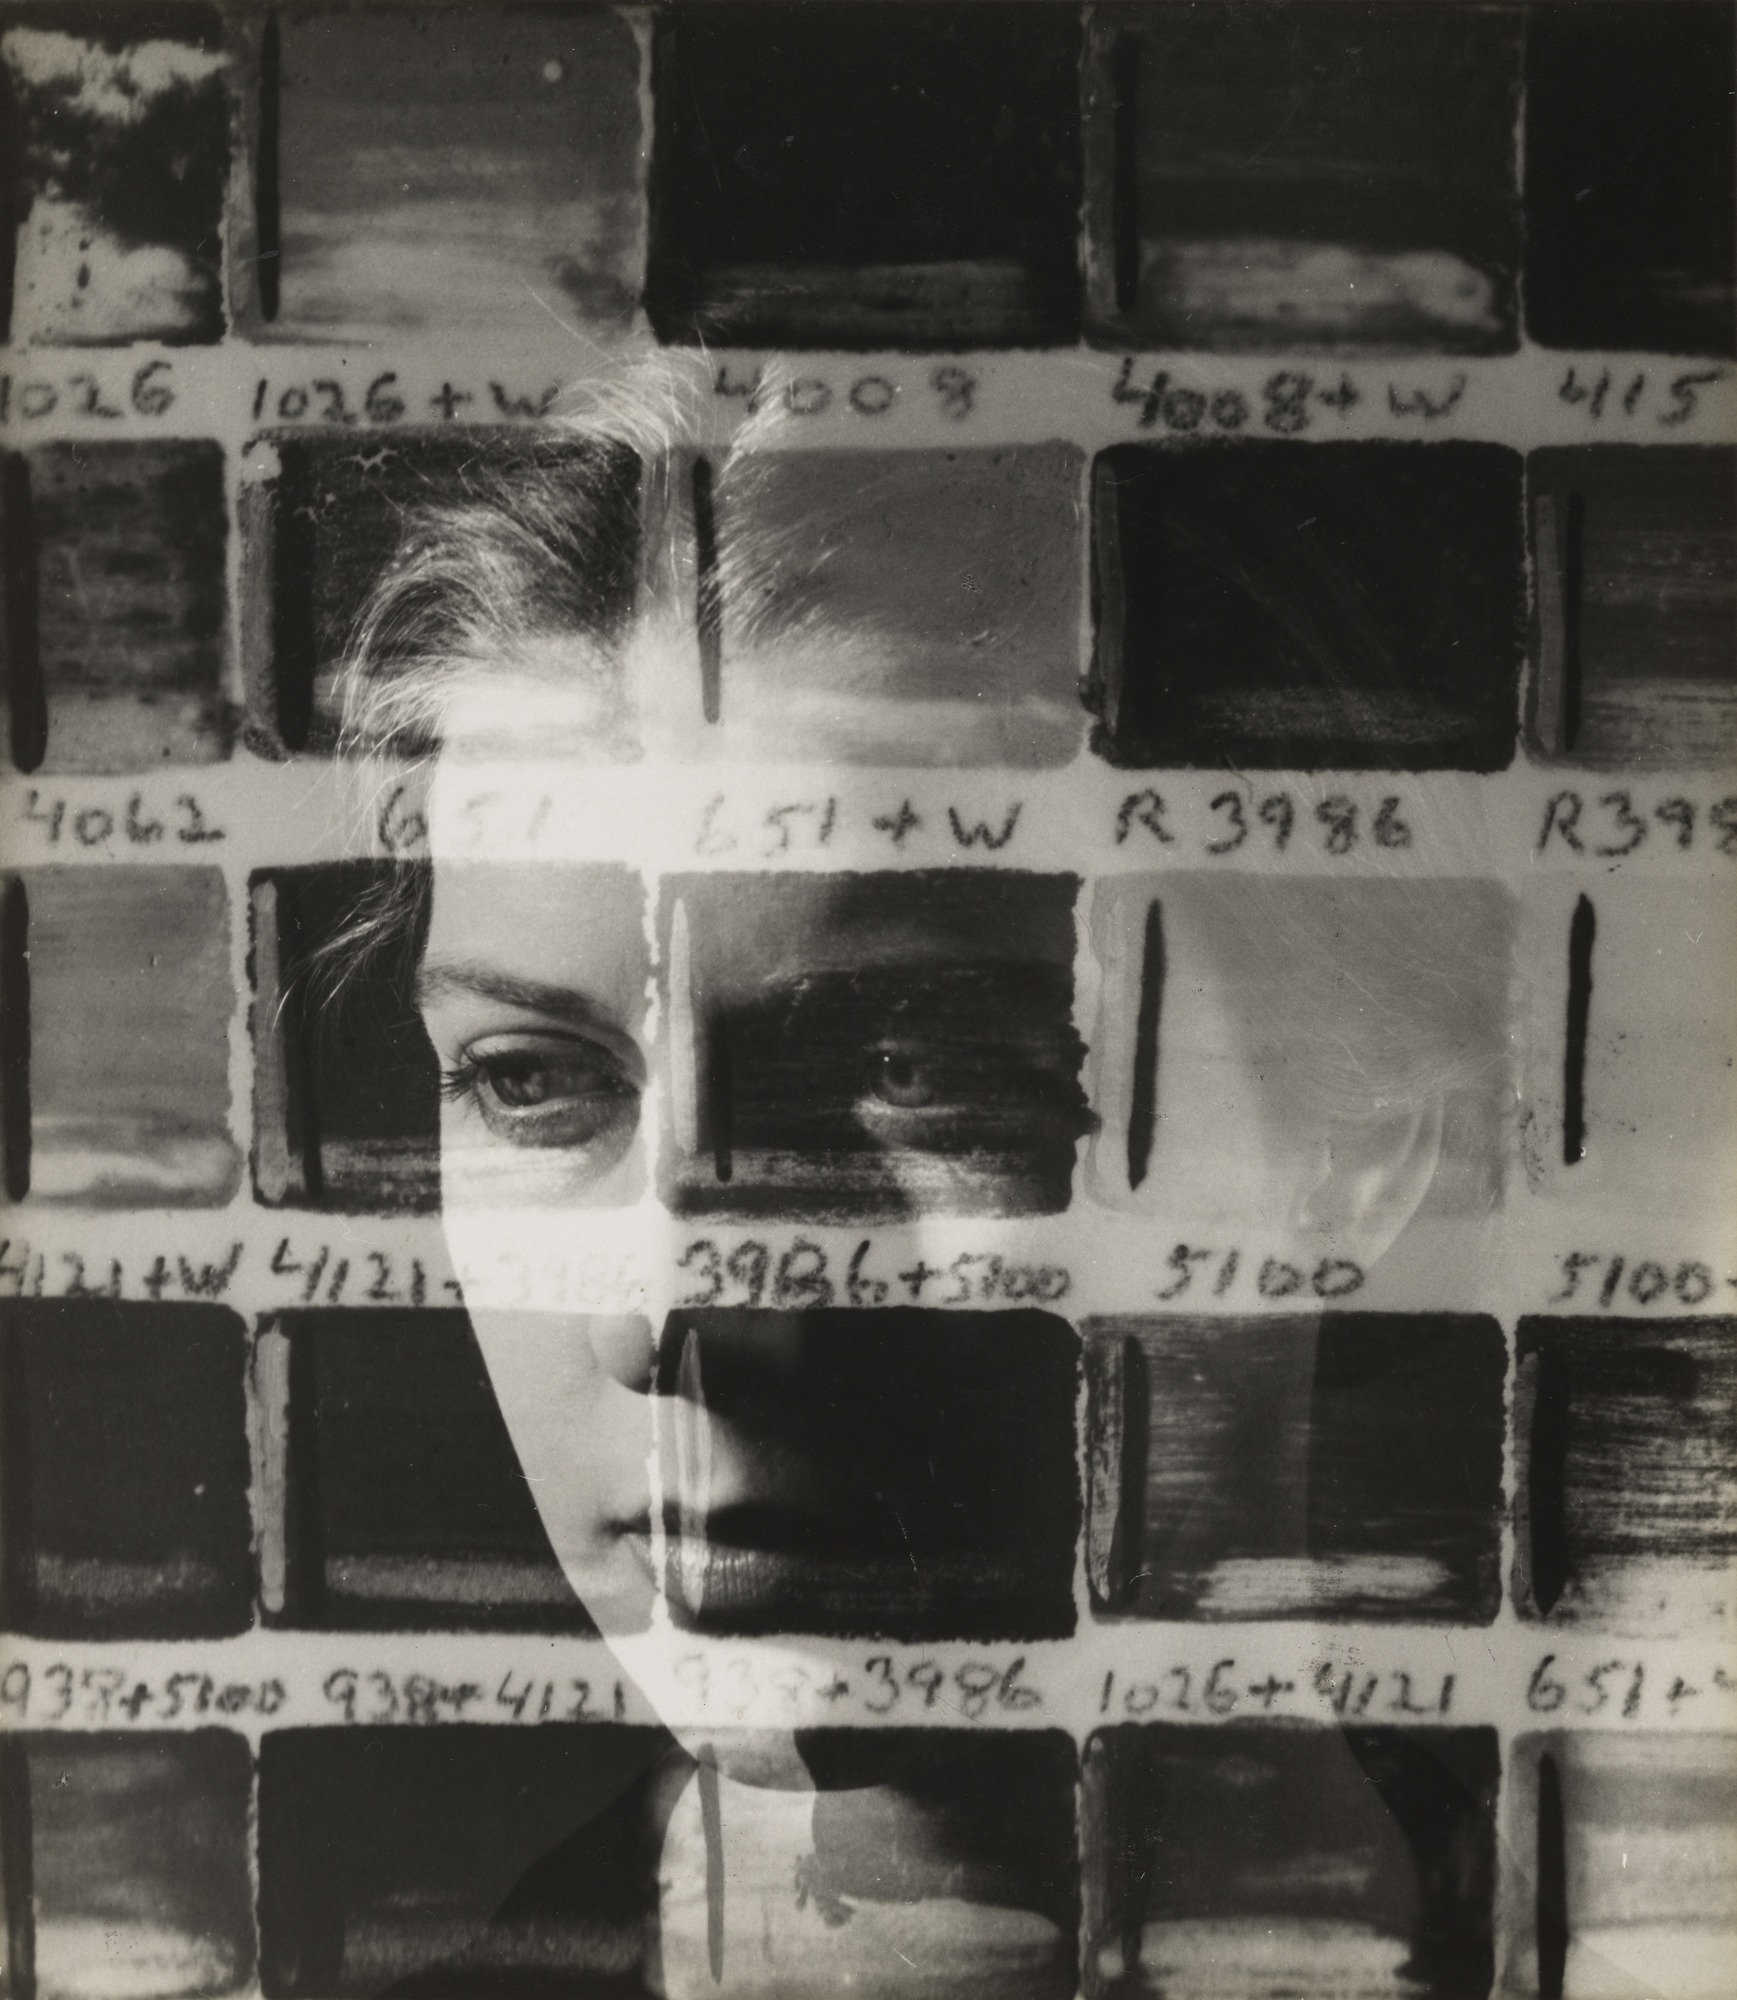 Photographic portrait of Carol Janeway by Maya Daren is a black-and-white photograph of a young white woman's face. The portrait is overlaid with a grid of smaller rectangles, making it look like a contact sheet. The is unsmiling and stares off into the distance.